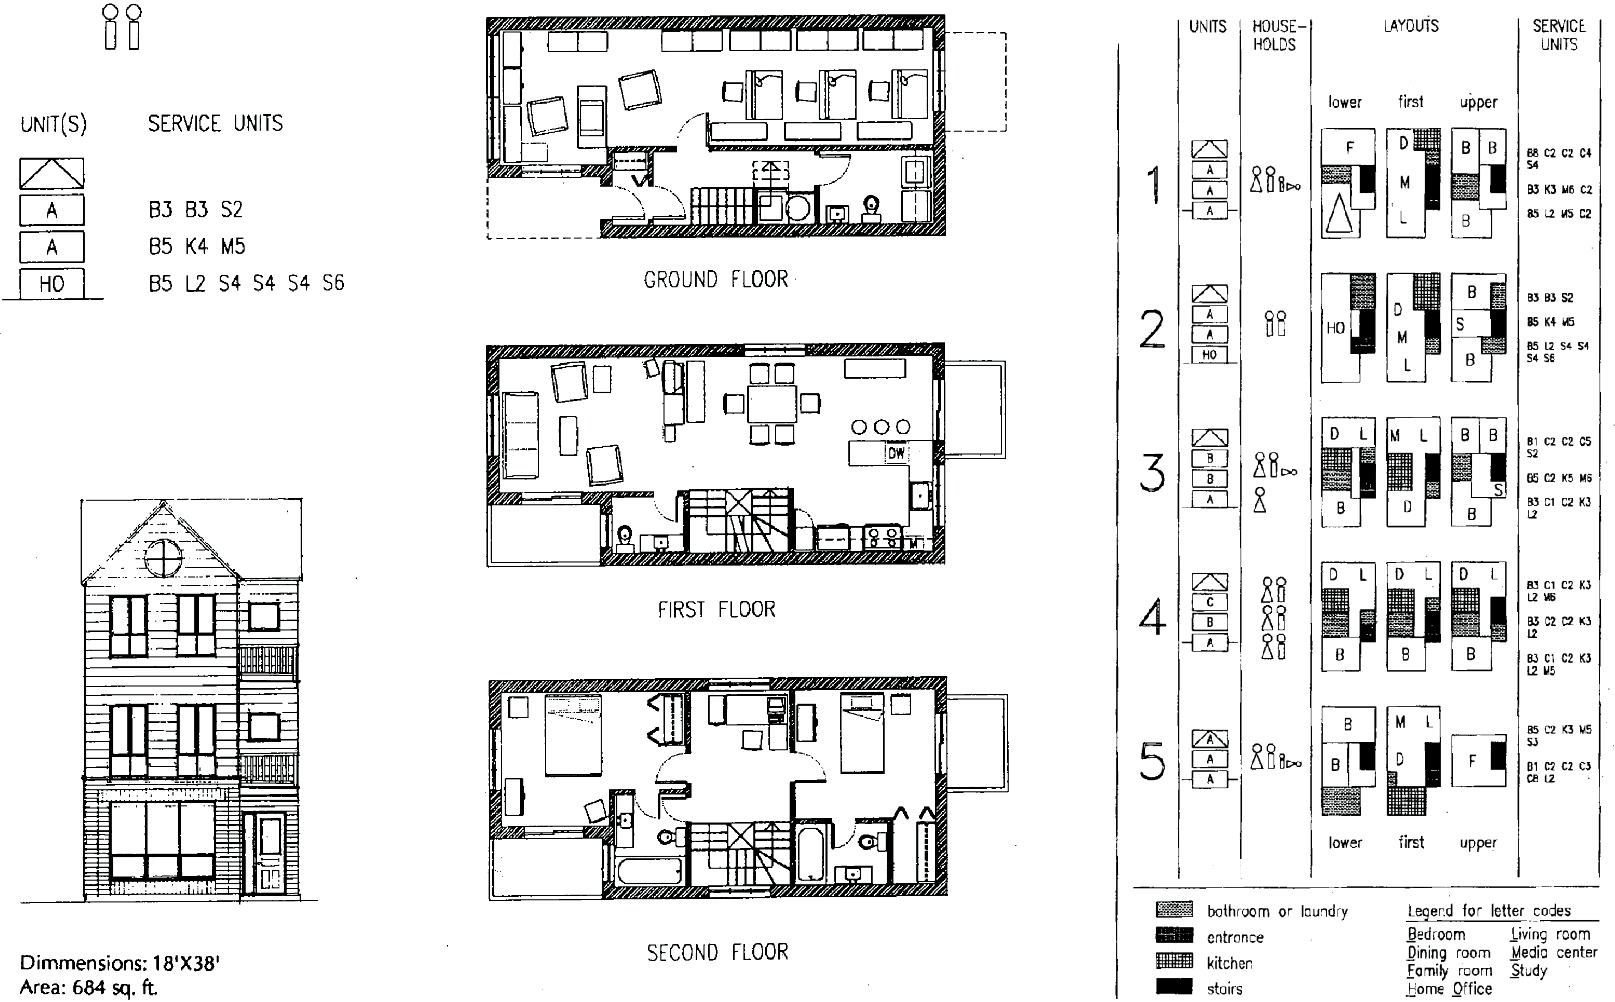 Black &amp; white technical drawings of three floor plans, one elevation and five layout options.